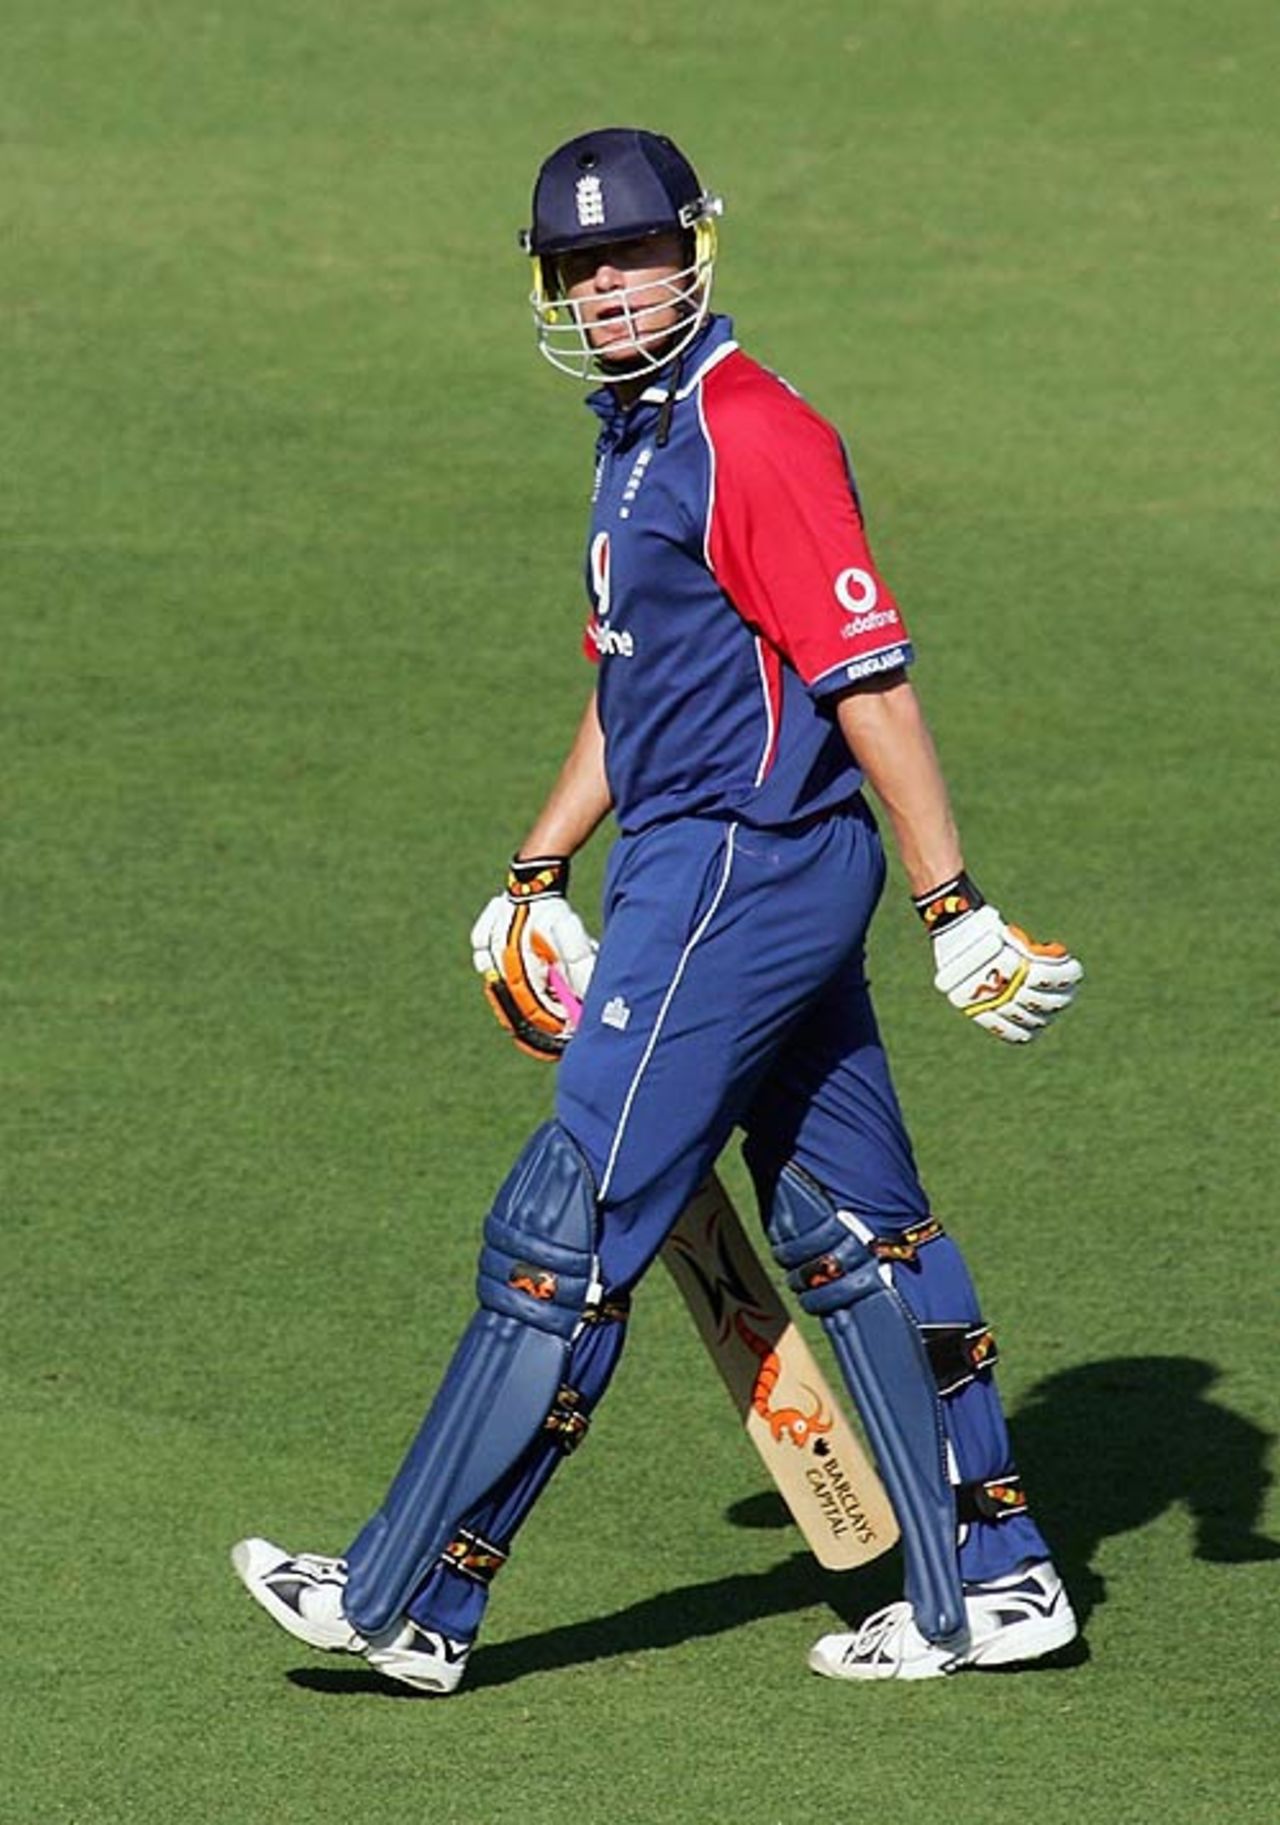 Andrew Flintoff trudges off after holing out to long-on, England v New Zealand, CB Series, 12th match, Brisbane, February 6, 2007